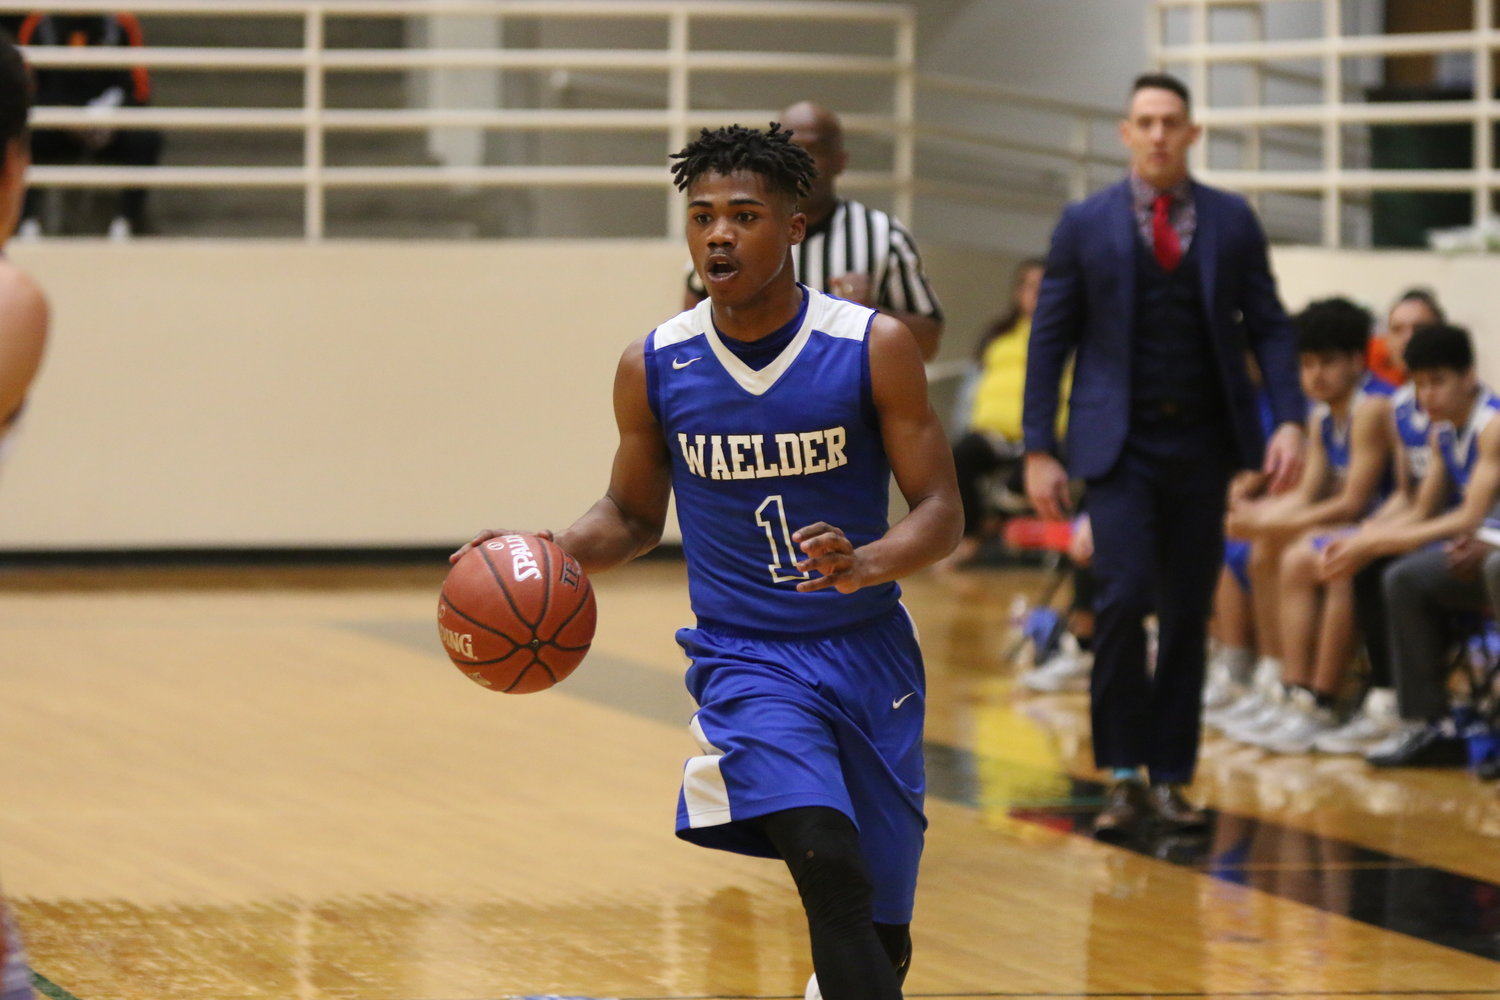 Isaiah Jones-Miller (1) finished the night with a team-leading 23 points in Waelder’s 62-58 loss against LaPoynor.